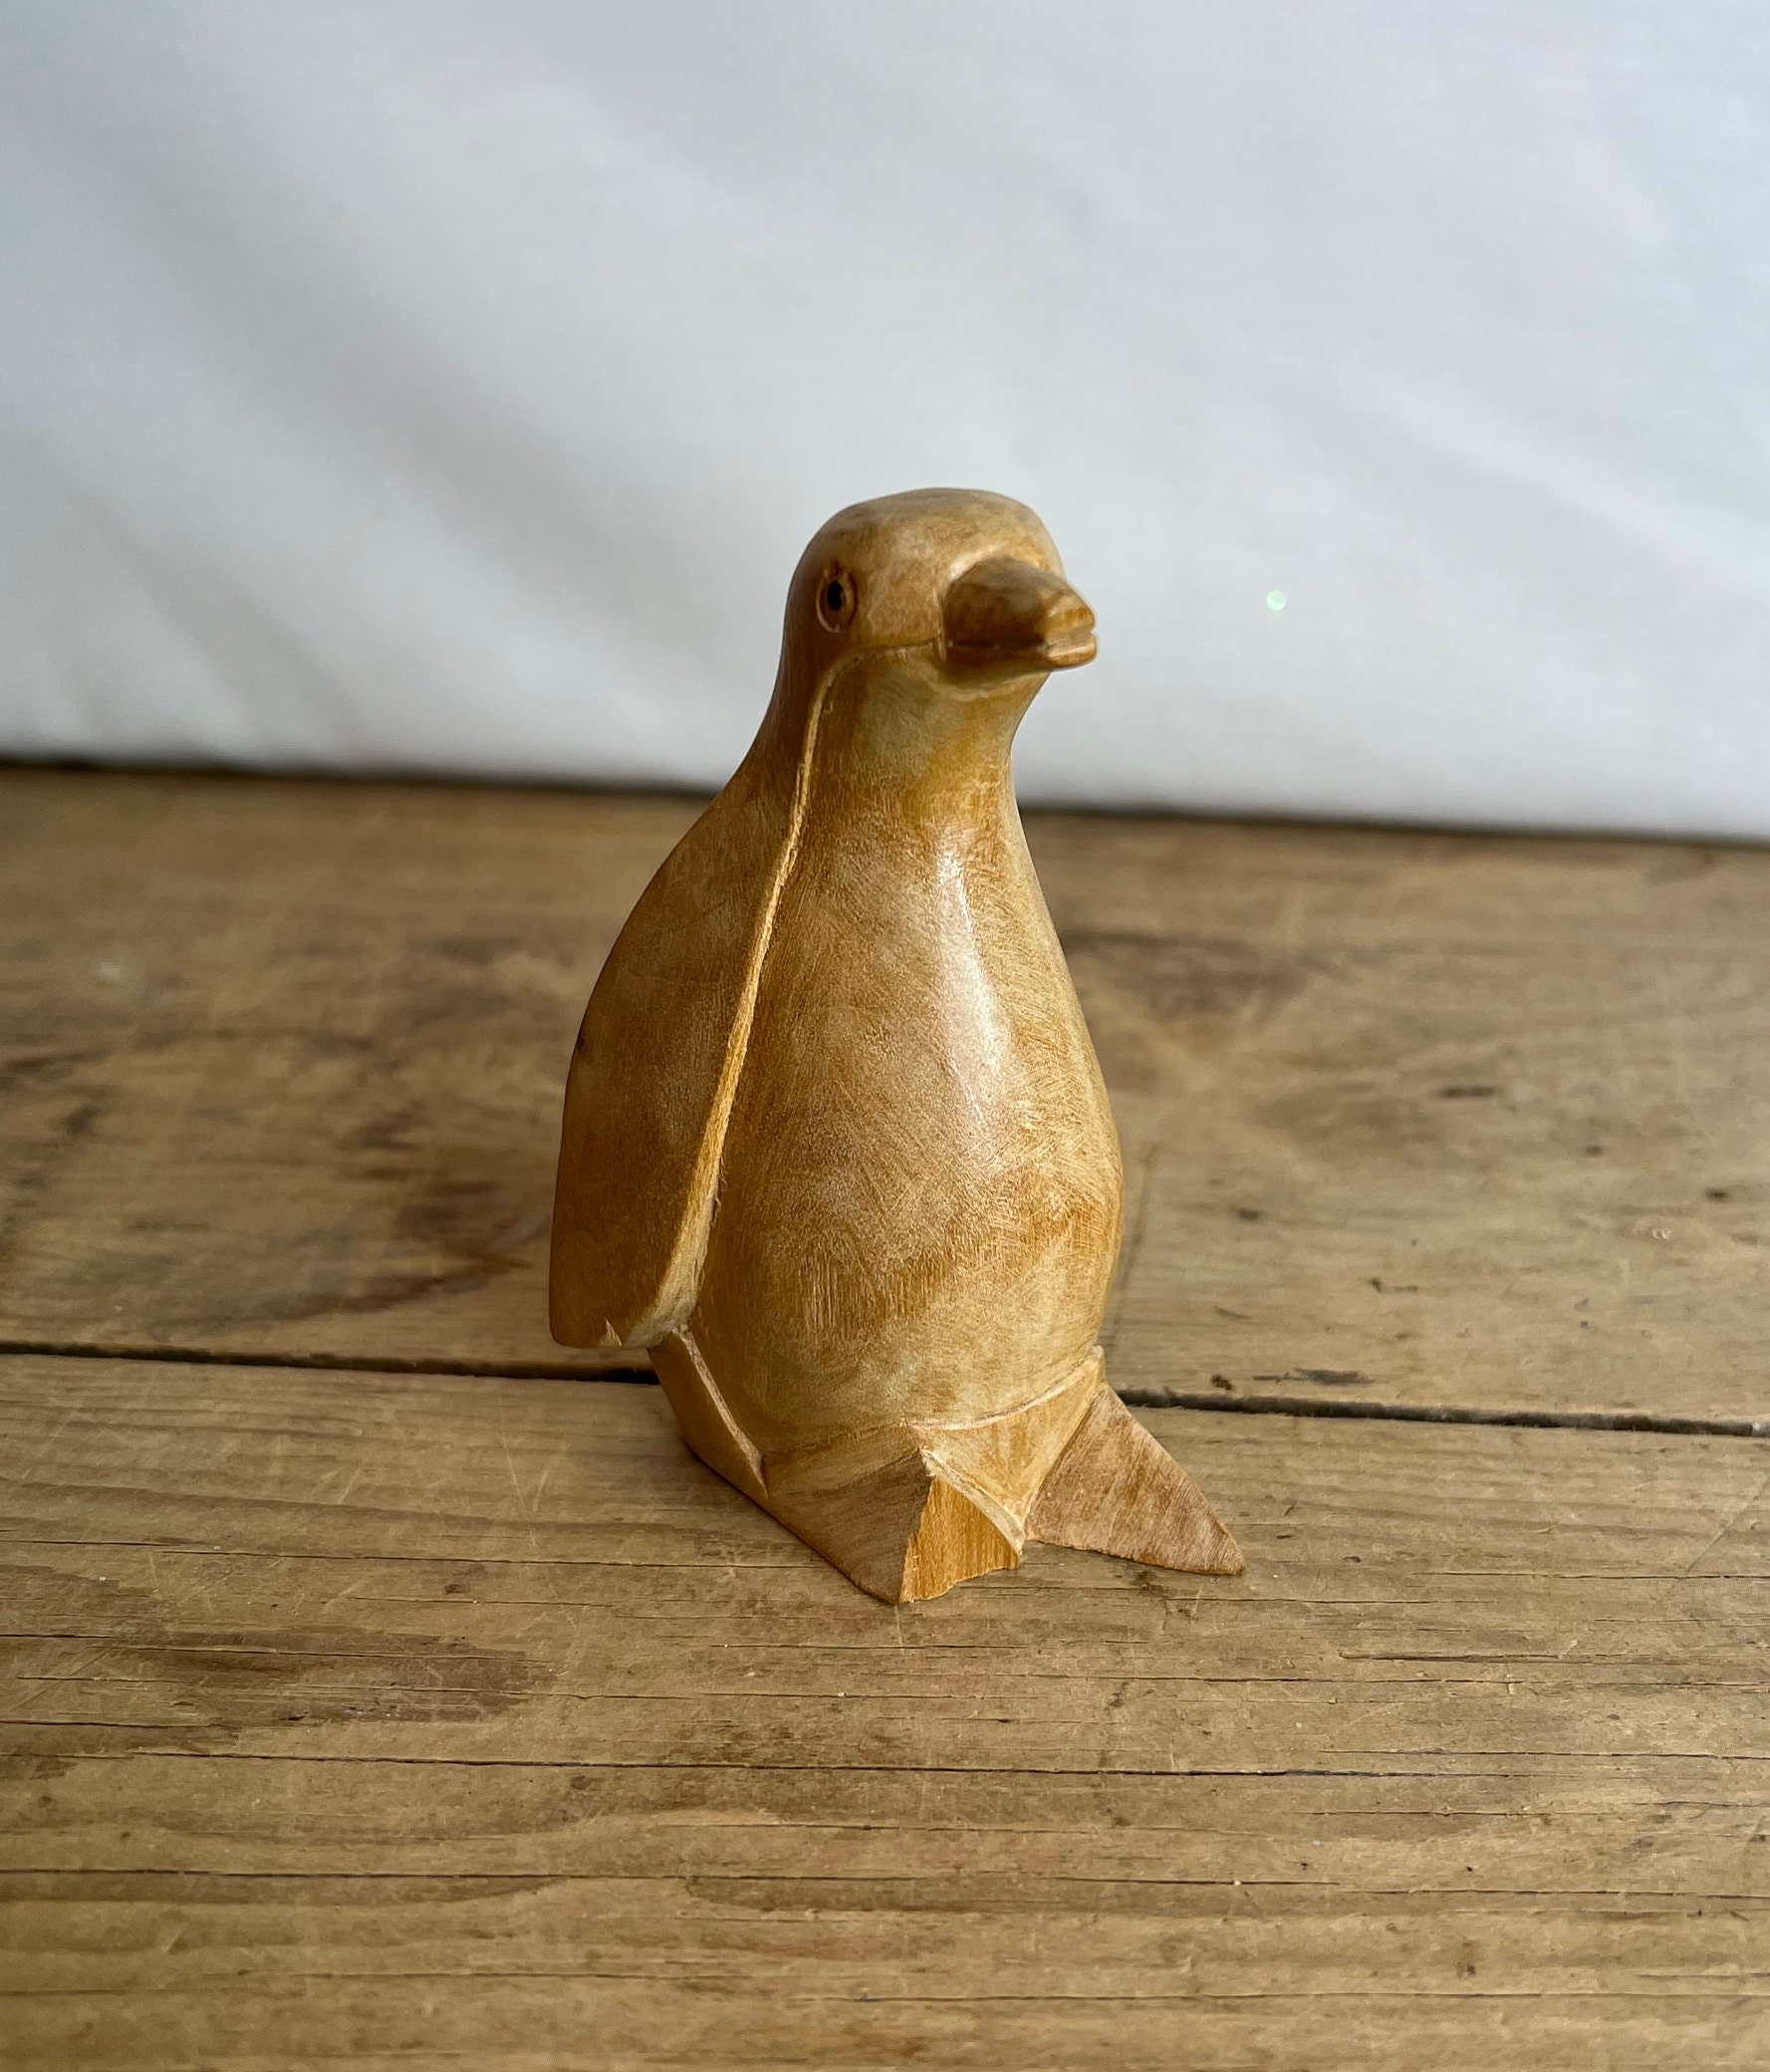 Wooden Penguin Model Home Decor Accessories Ornaments Animal Figurines  Desktop Decor Display Wood Handmade Crafts Gifts Toys - Figurines &  Miniatures - AliExpress